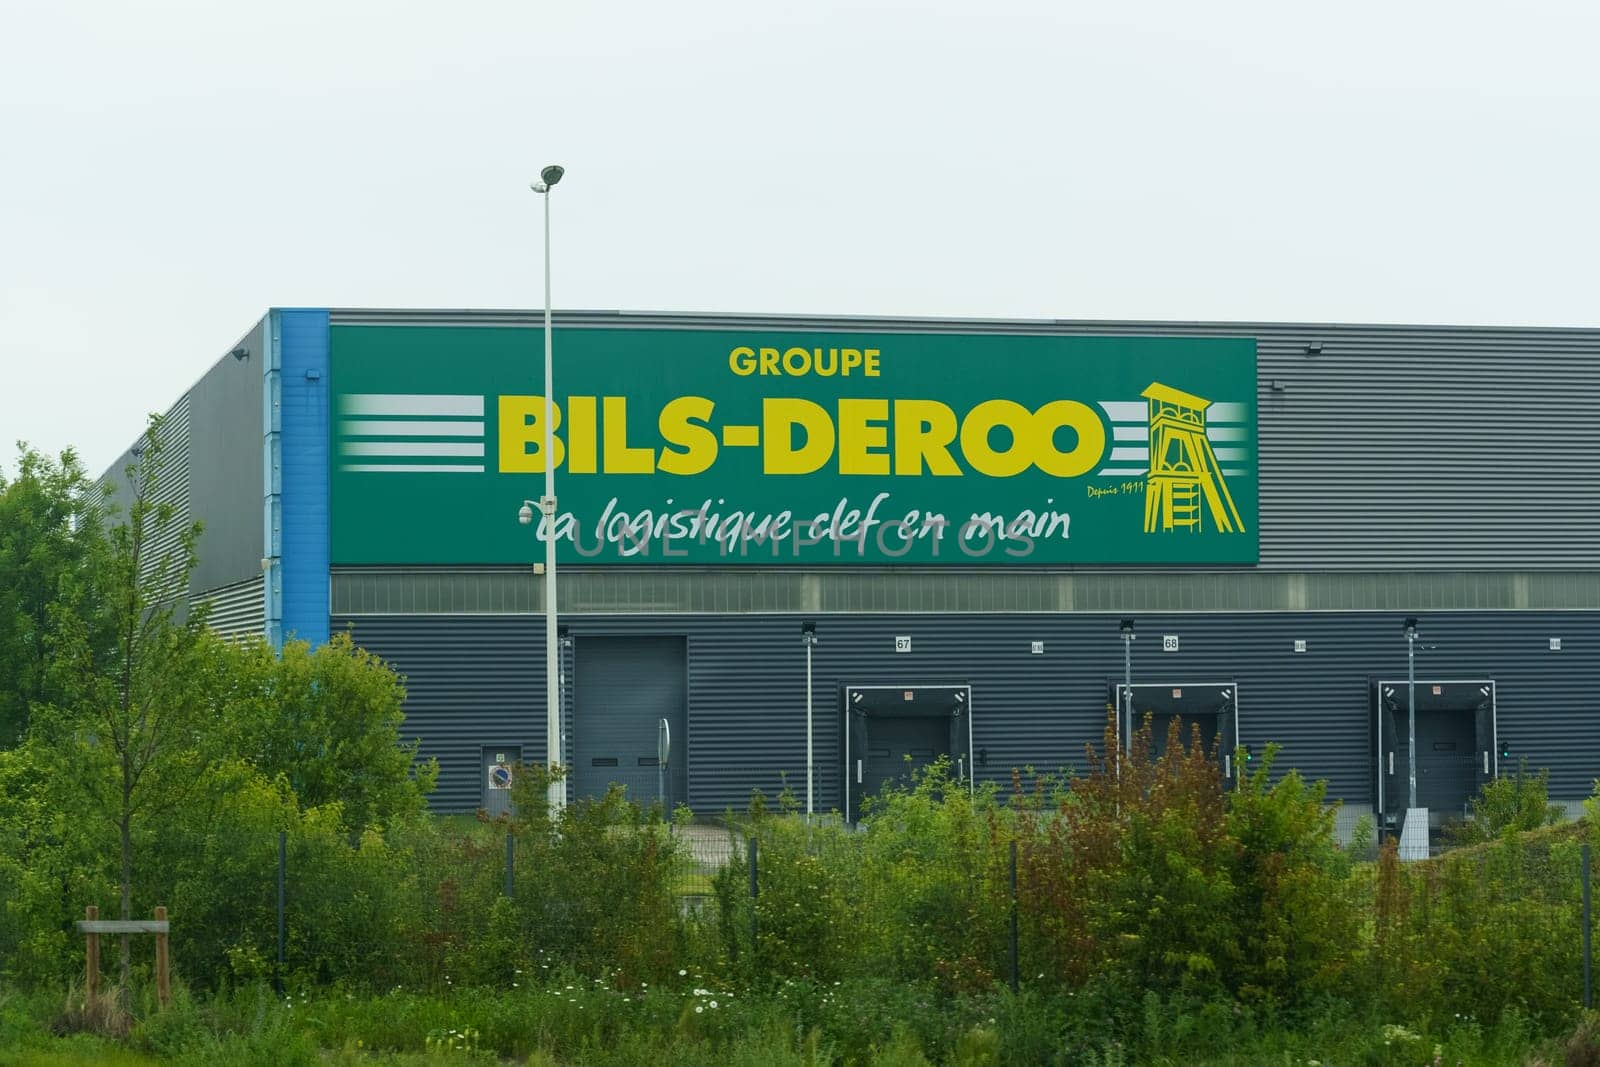 Noyelles-Godeau, France - May 22, 2023: - May 22, 2023:The facade of Bils-Deroos logistics warehouse, showcasing the companys signage with an illustration of a crane, under overcast skies.